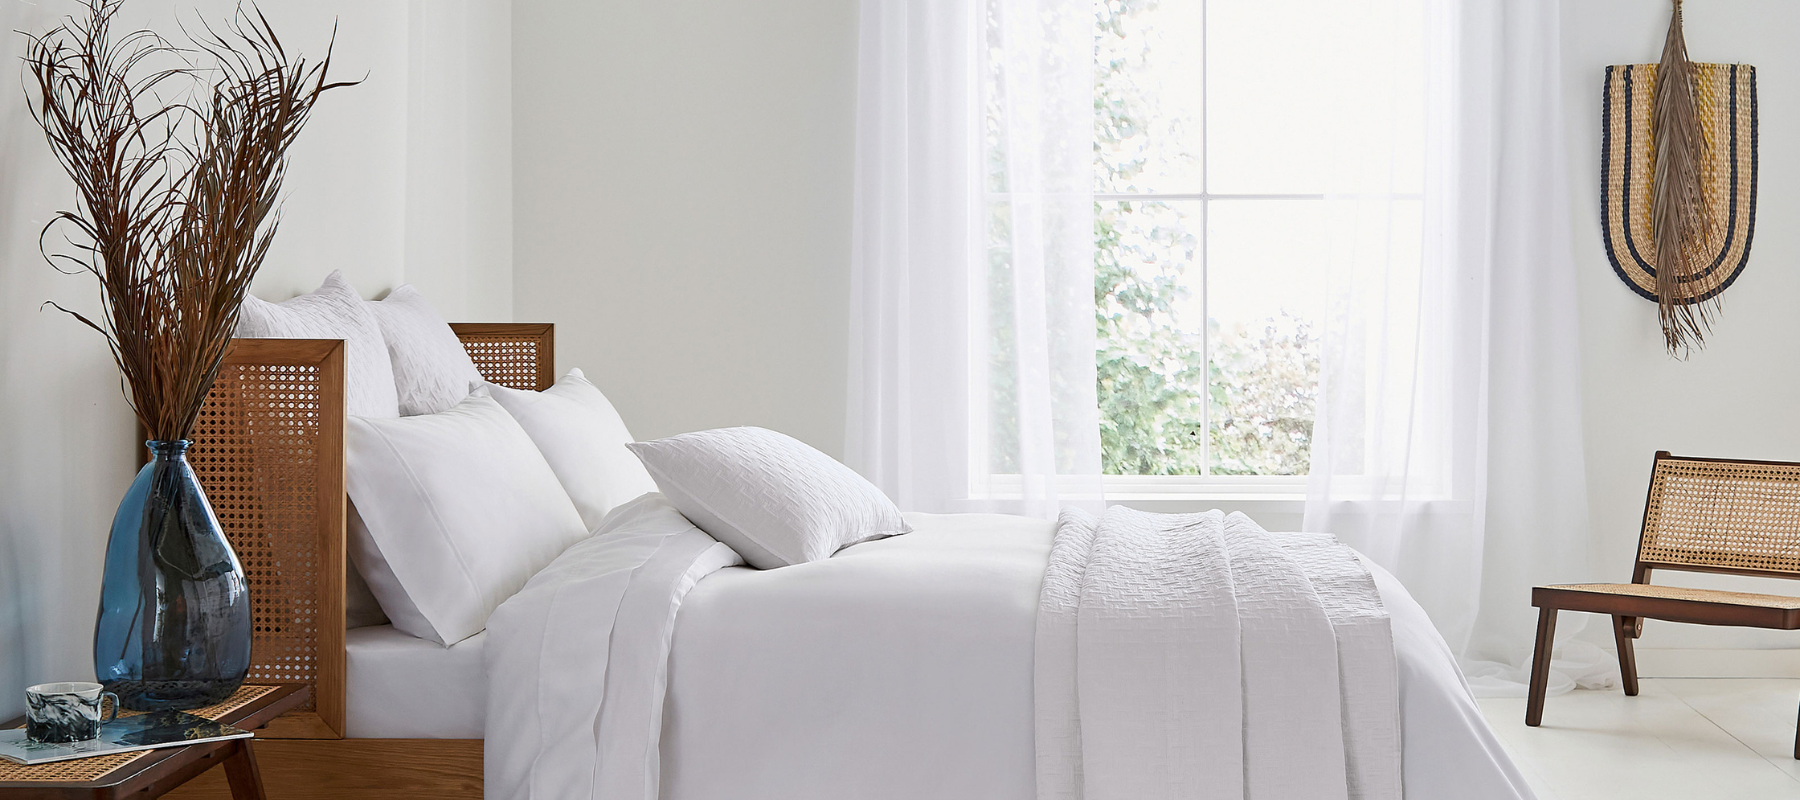 6 Frequently Asked Questions About Bamboo Sheets – ANSWERED!